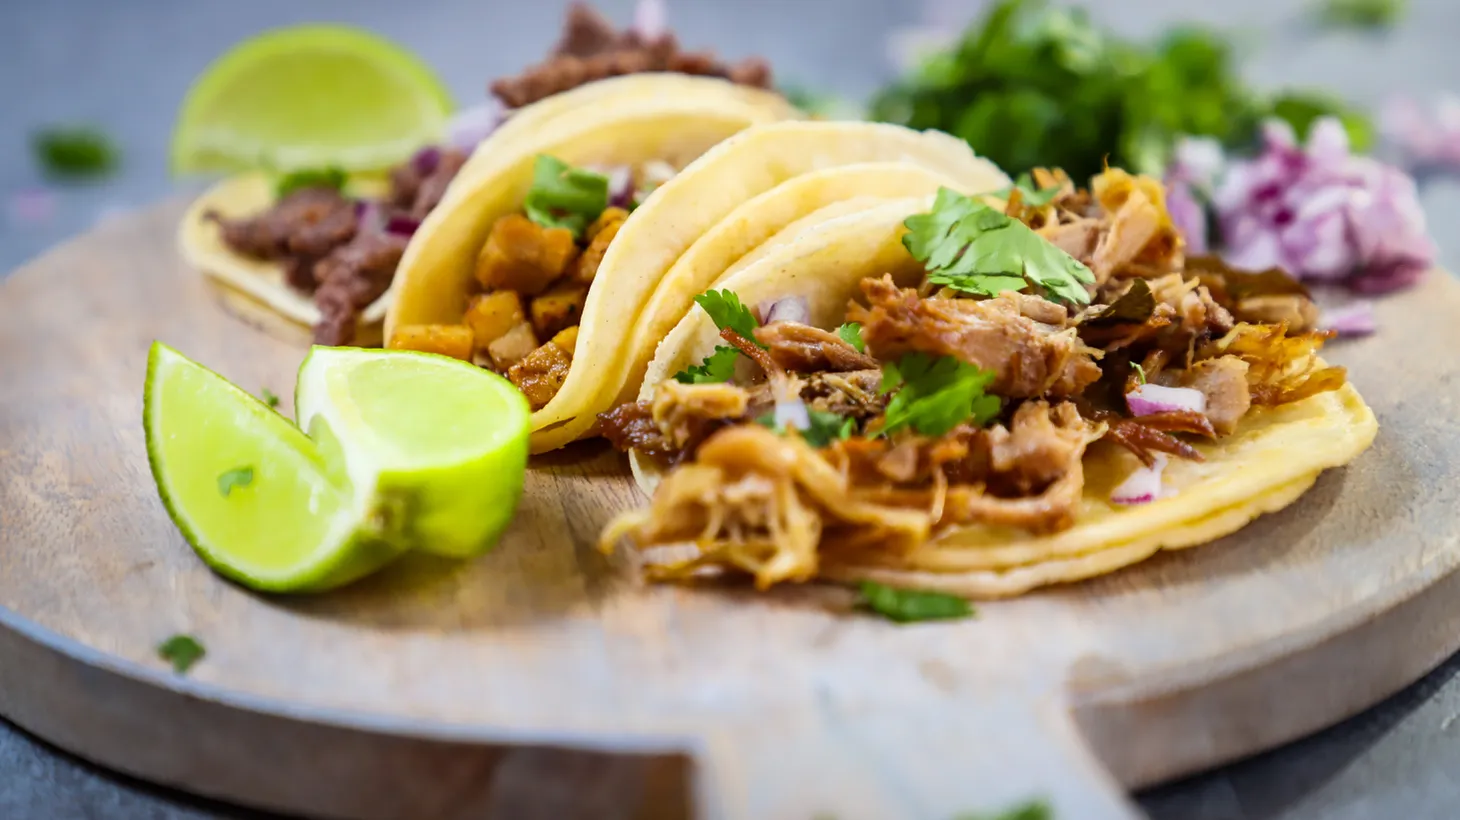 The journey of a thousand tacos begins with a single bite.